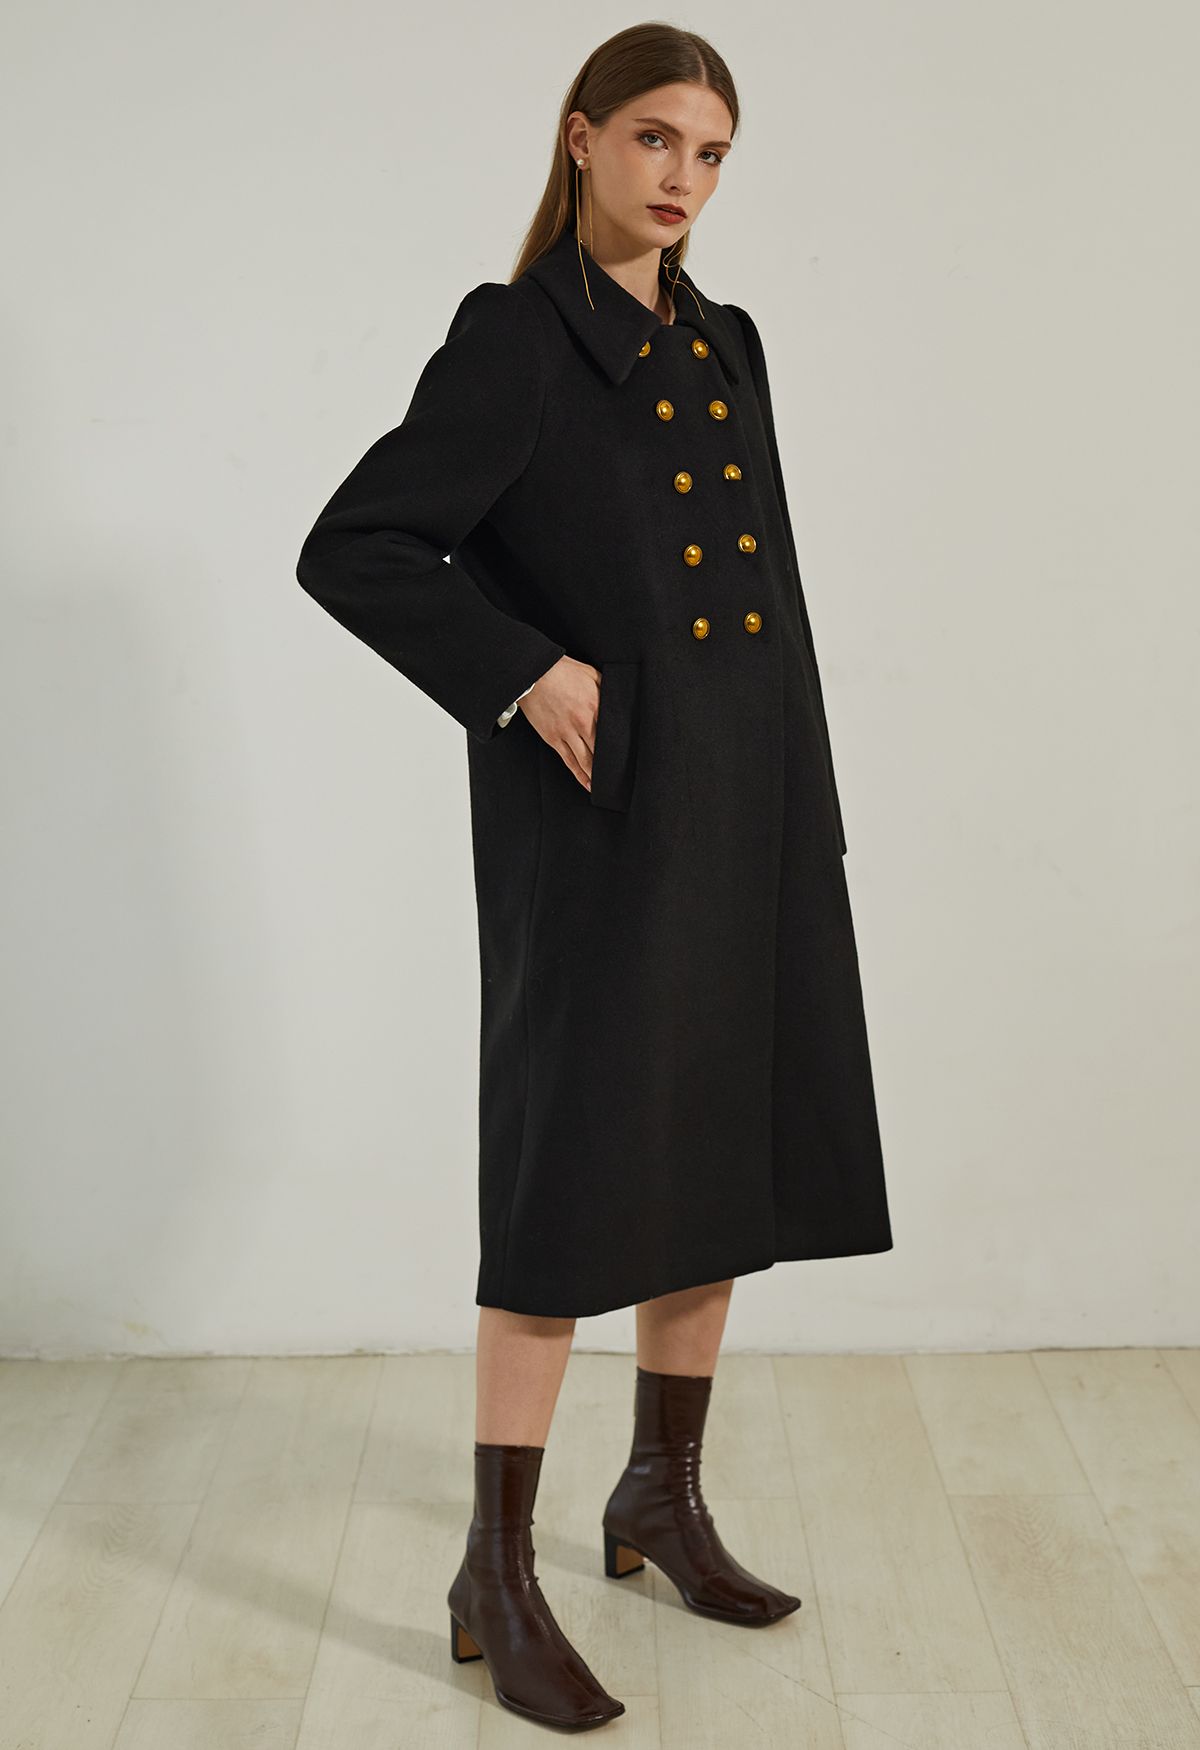 Straight Cut Double-Breasted Wool-Blend Coat in Black